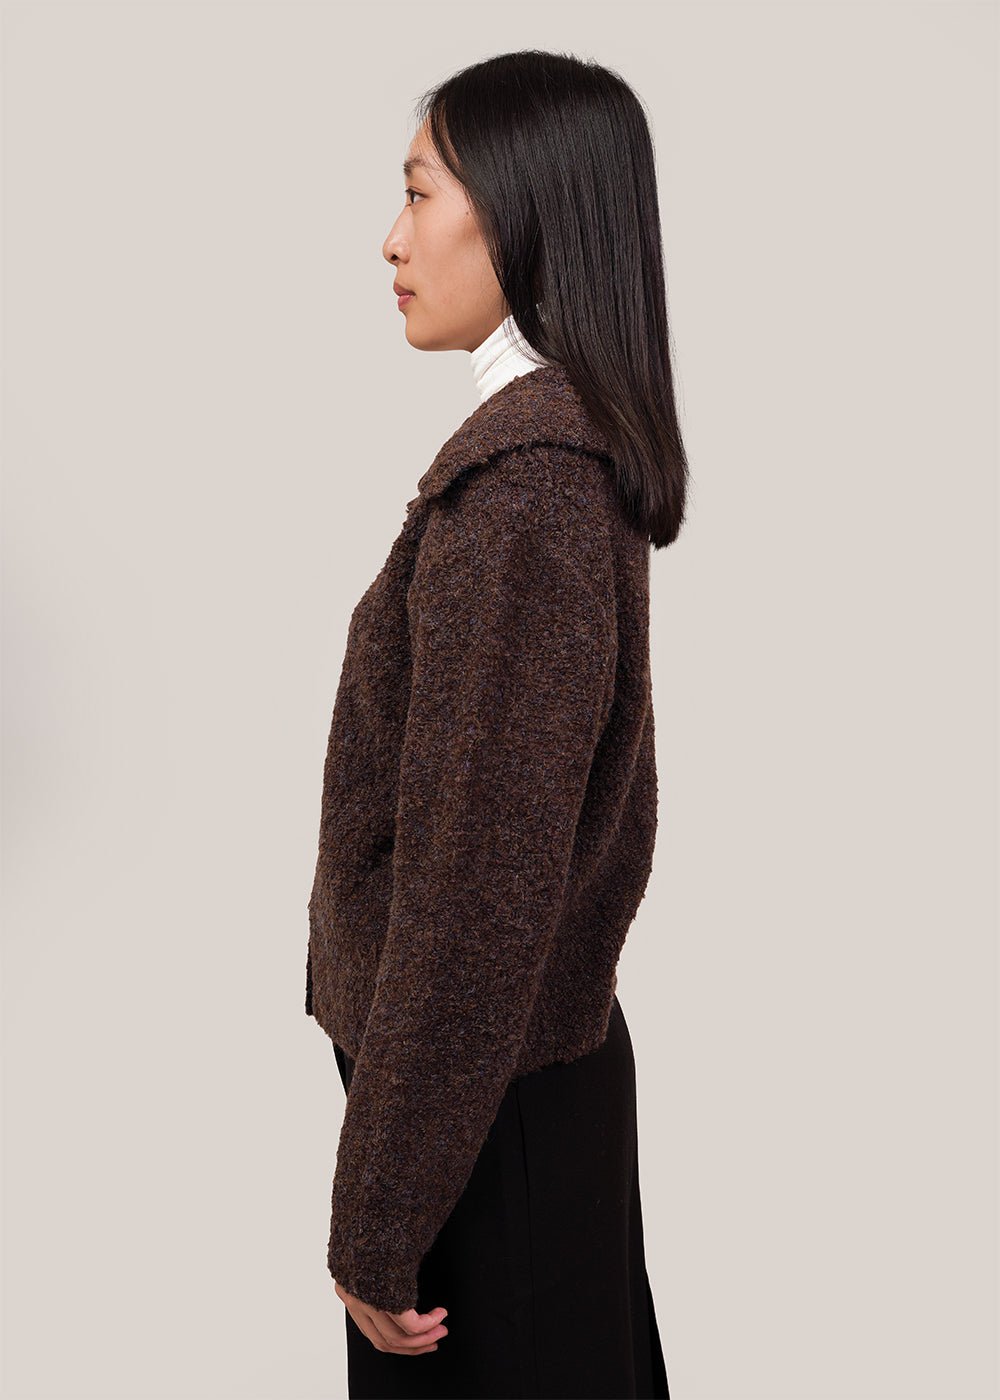 https://newclassics.ca/cdn/shop/products/mijeong-park-brown-spread-collar-boucle-cardigan-new-classics-studios-sustainable-and-ethical-fashion-canada-124609_1000x.jpg?v=1695355198